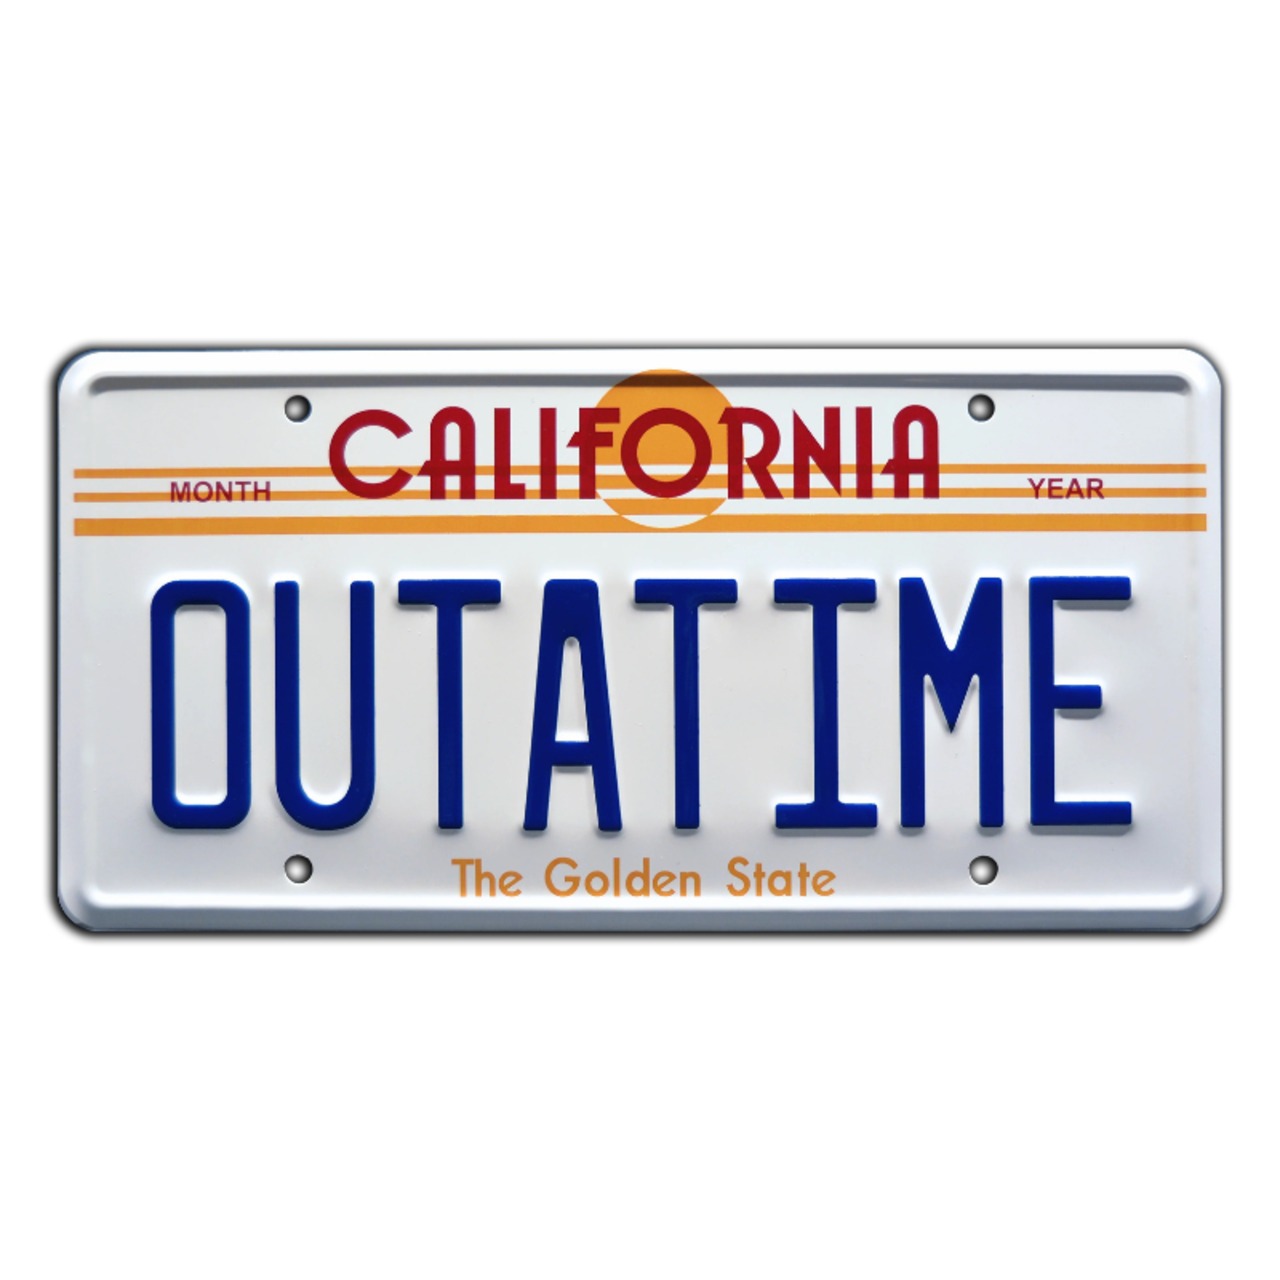 Back to the Future ナンバープレート（OUTATIME/CALIFORNIA)